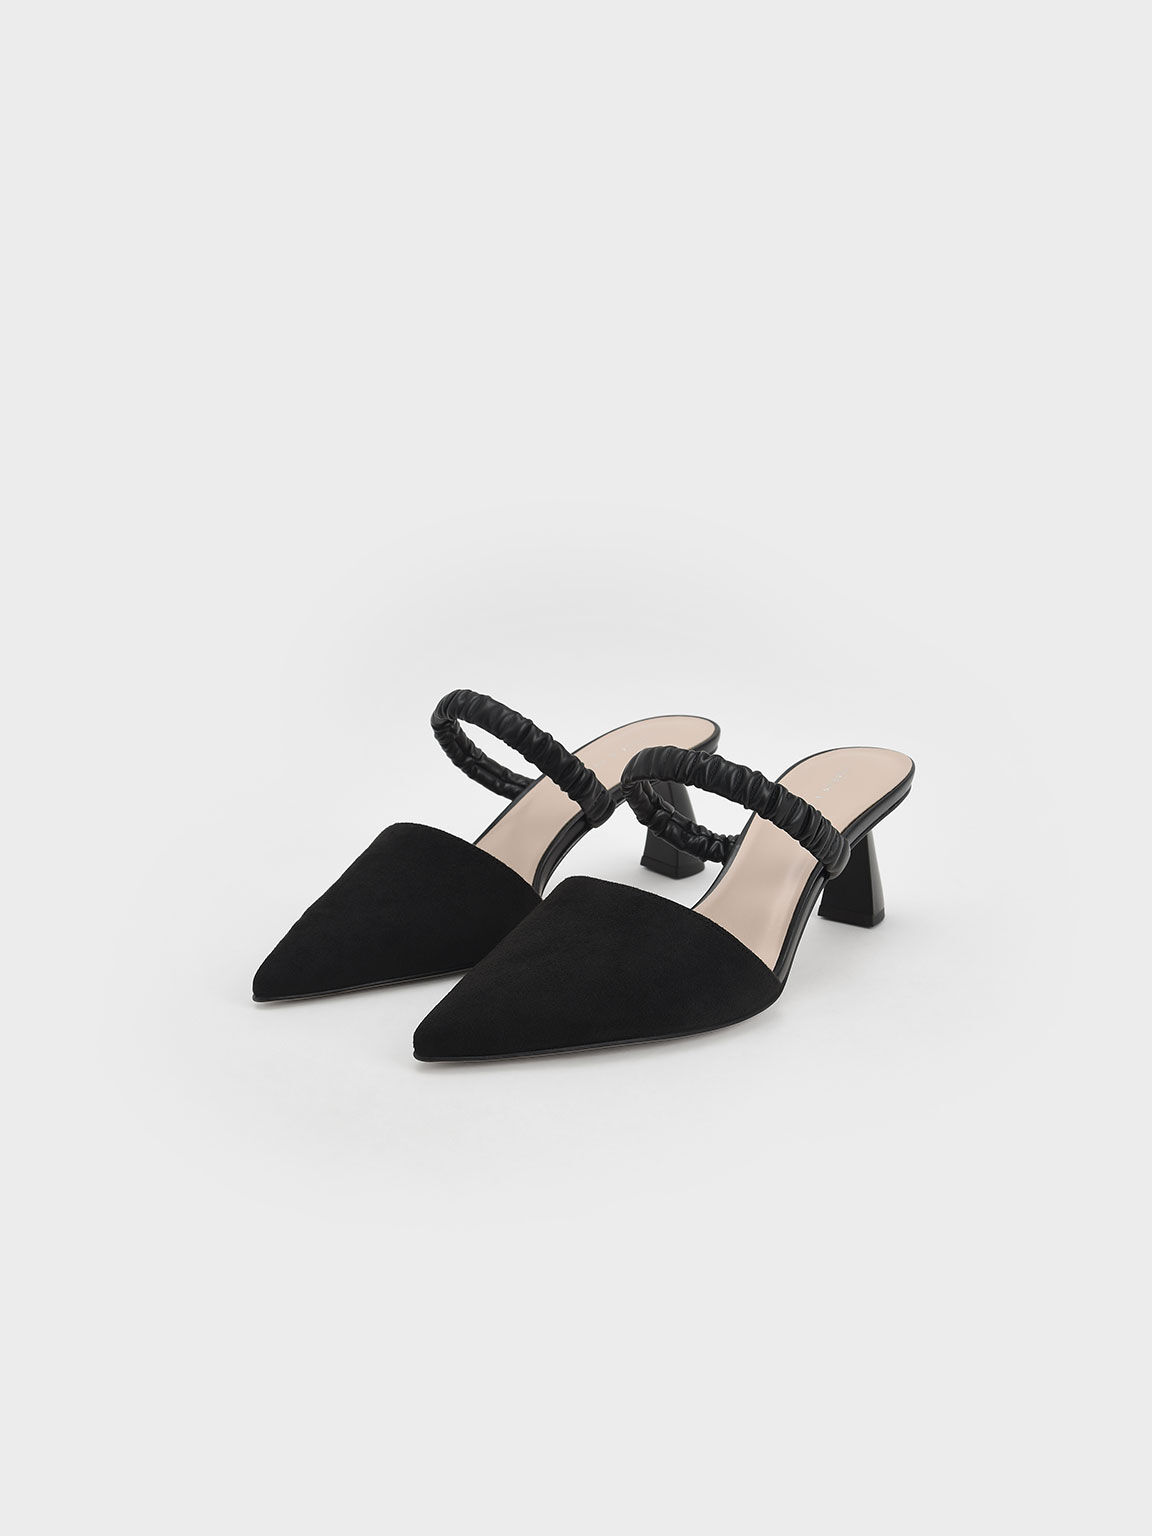 Ruched Strap Textured Mules, Black, hi-res